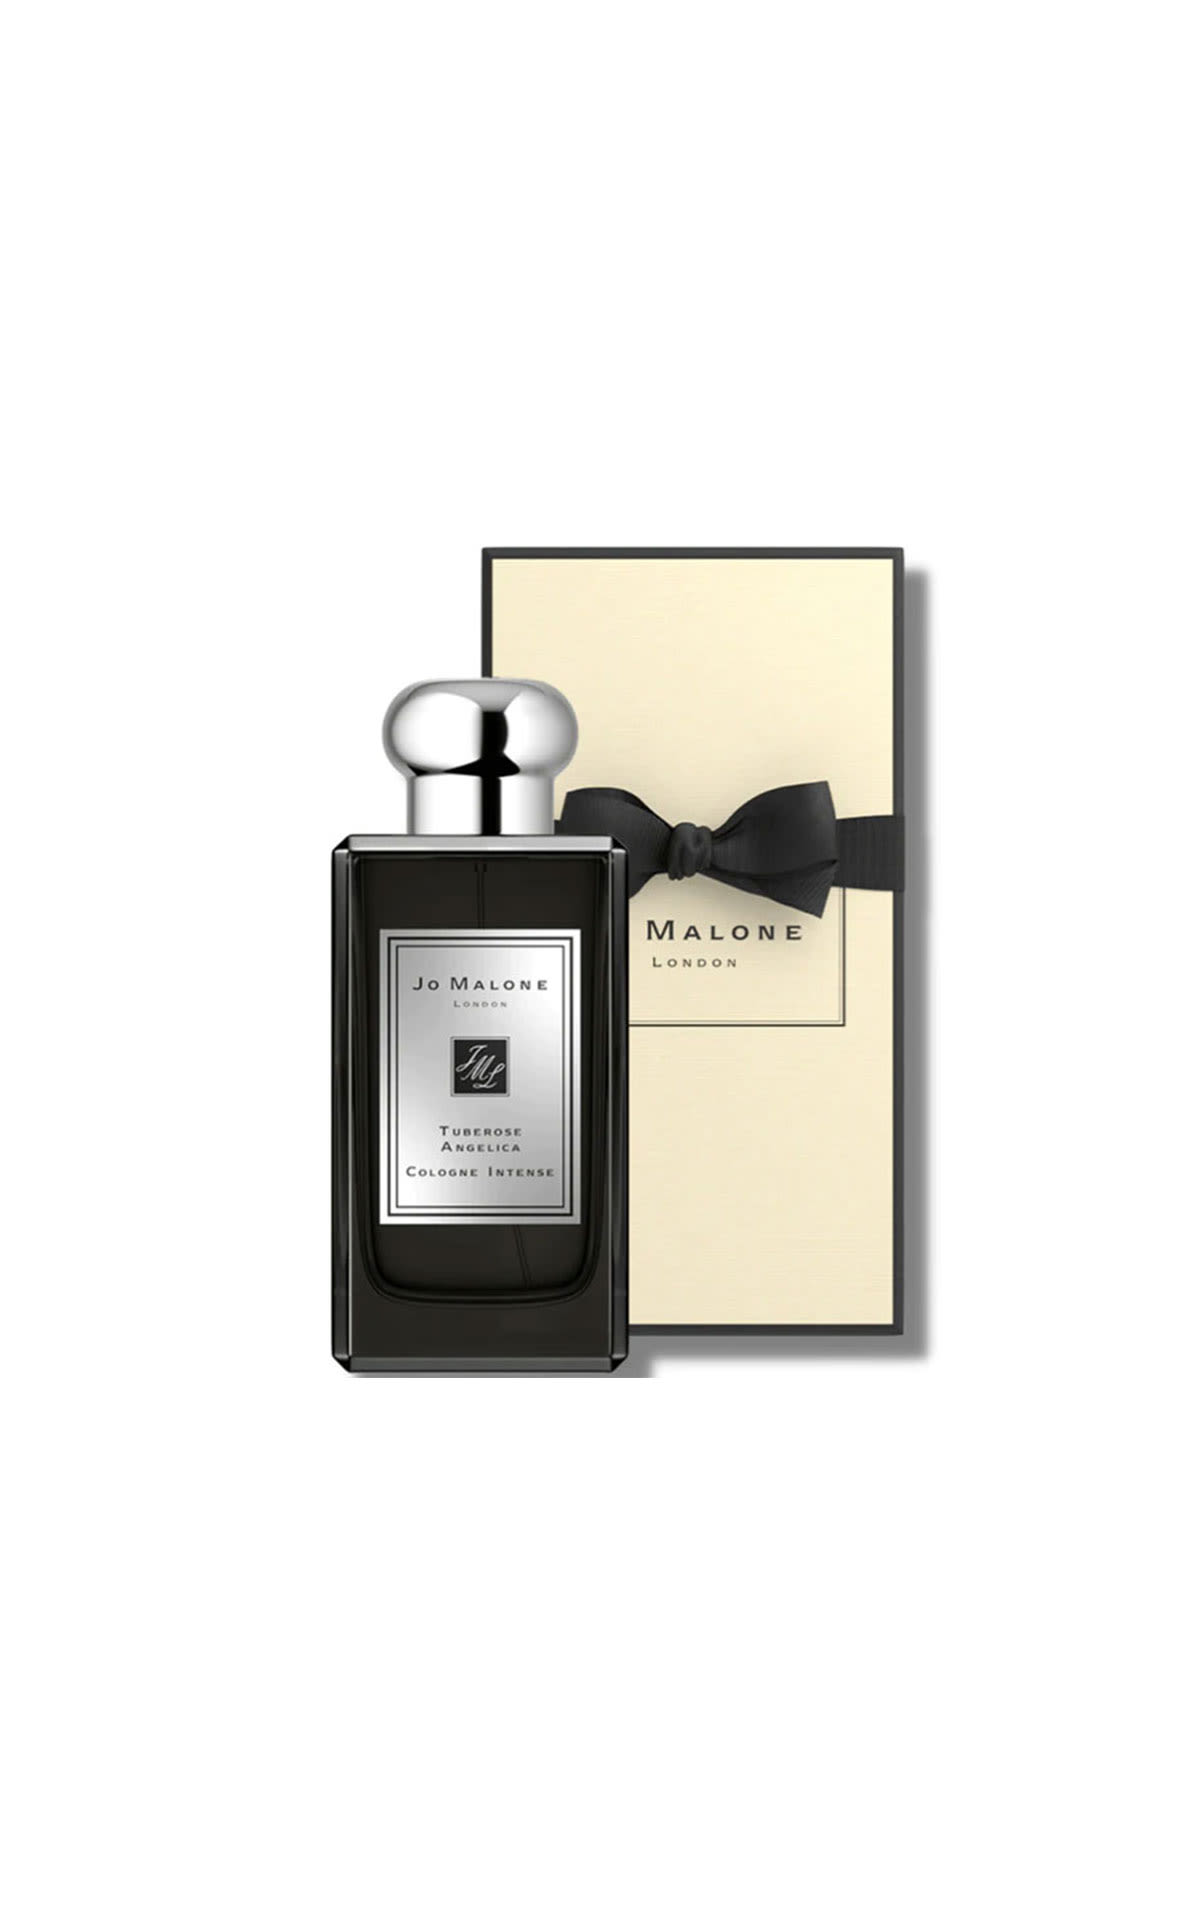 Jo Malone London Tuberose angelica cologne intense from Bicester Village